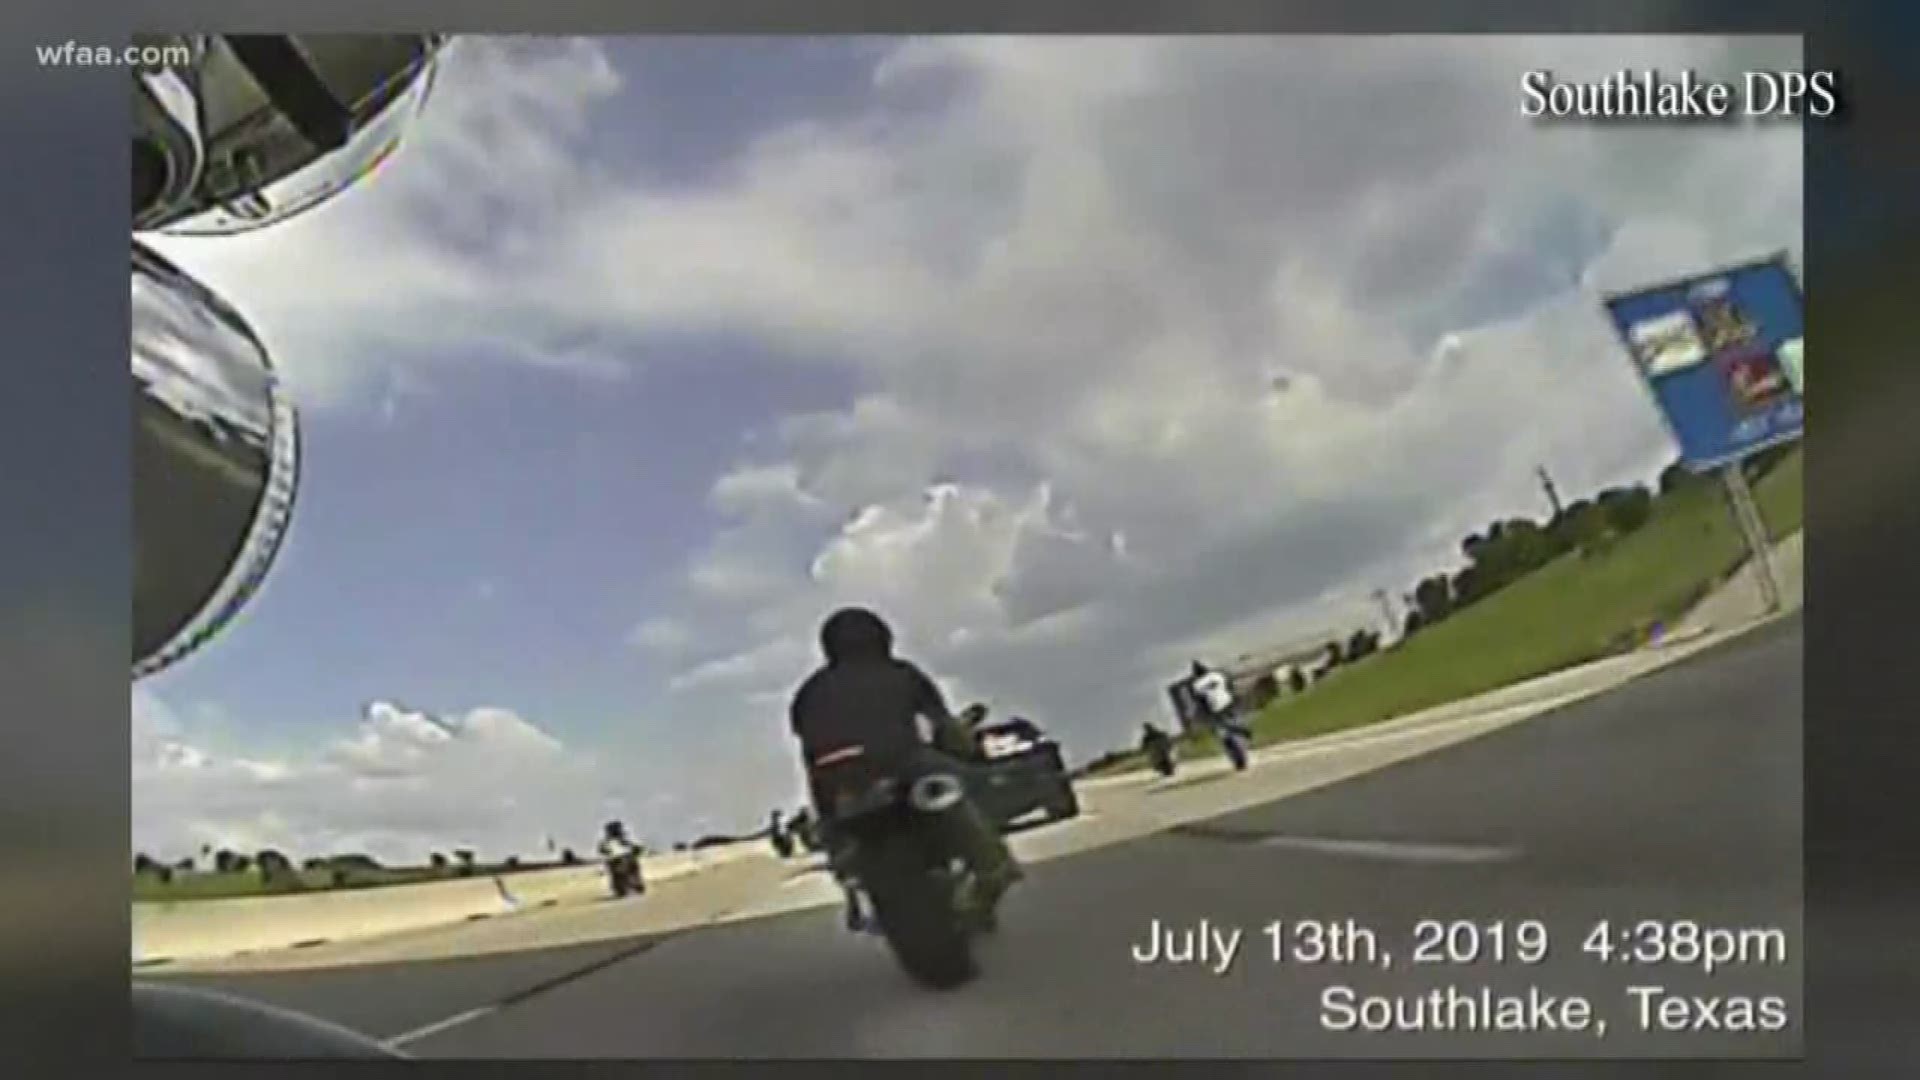 Southlake police are asking for help identifying the biker so they can pursue criminal charges.